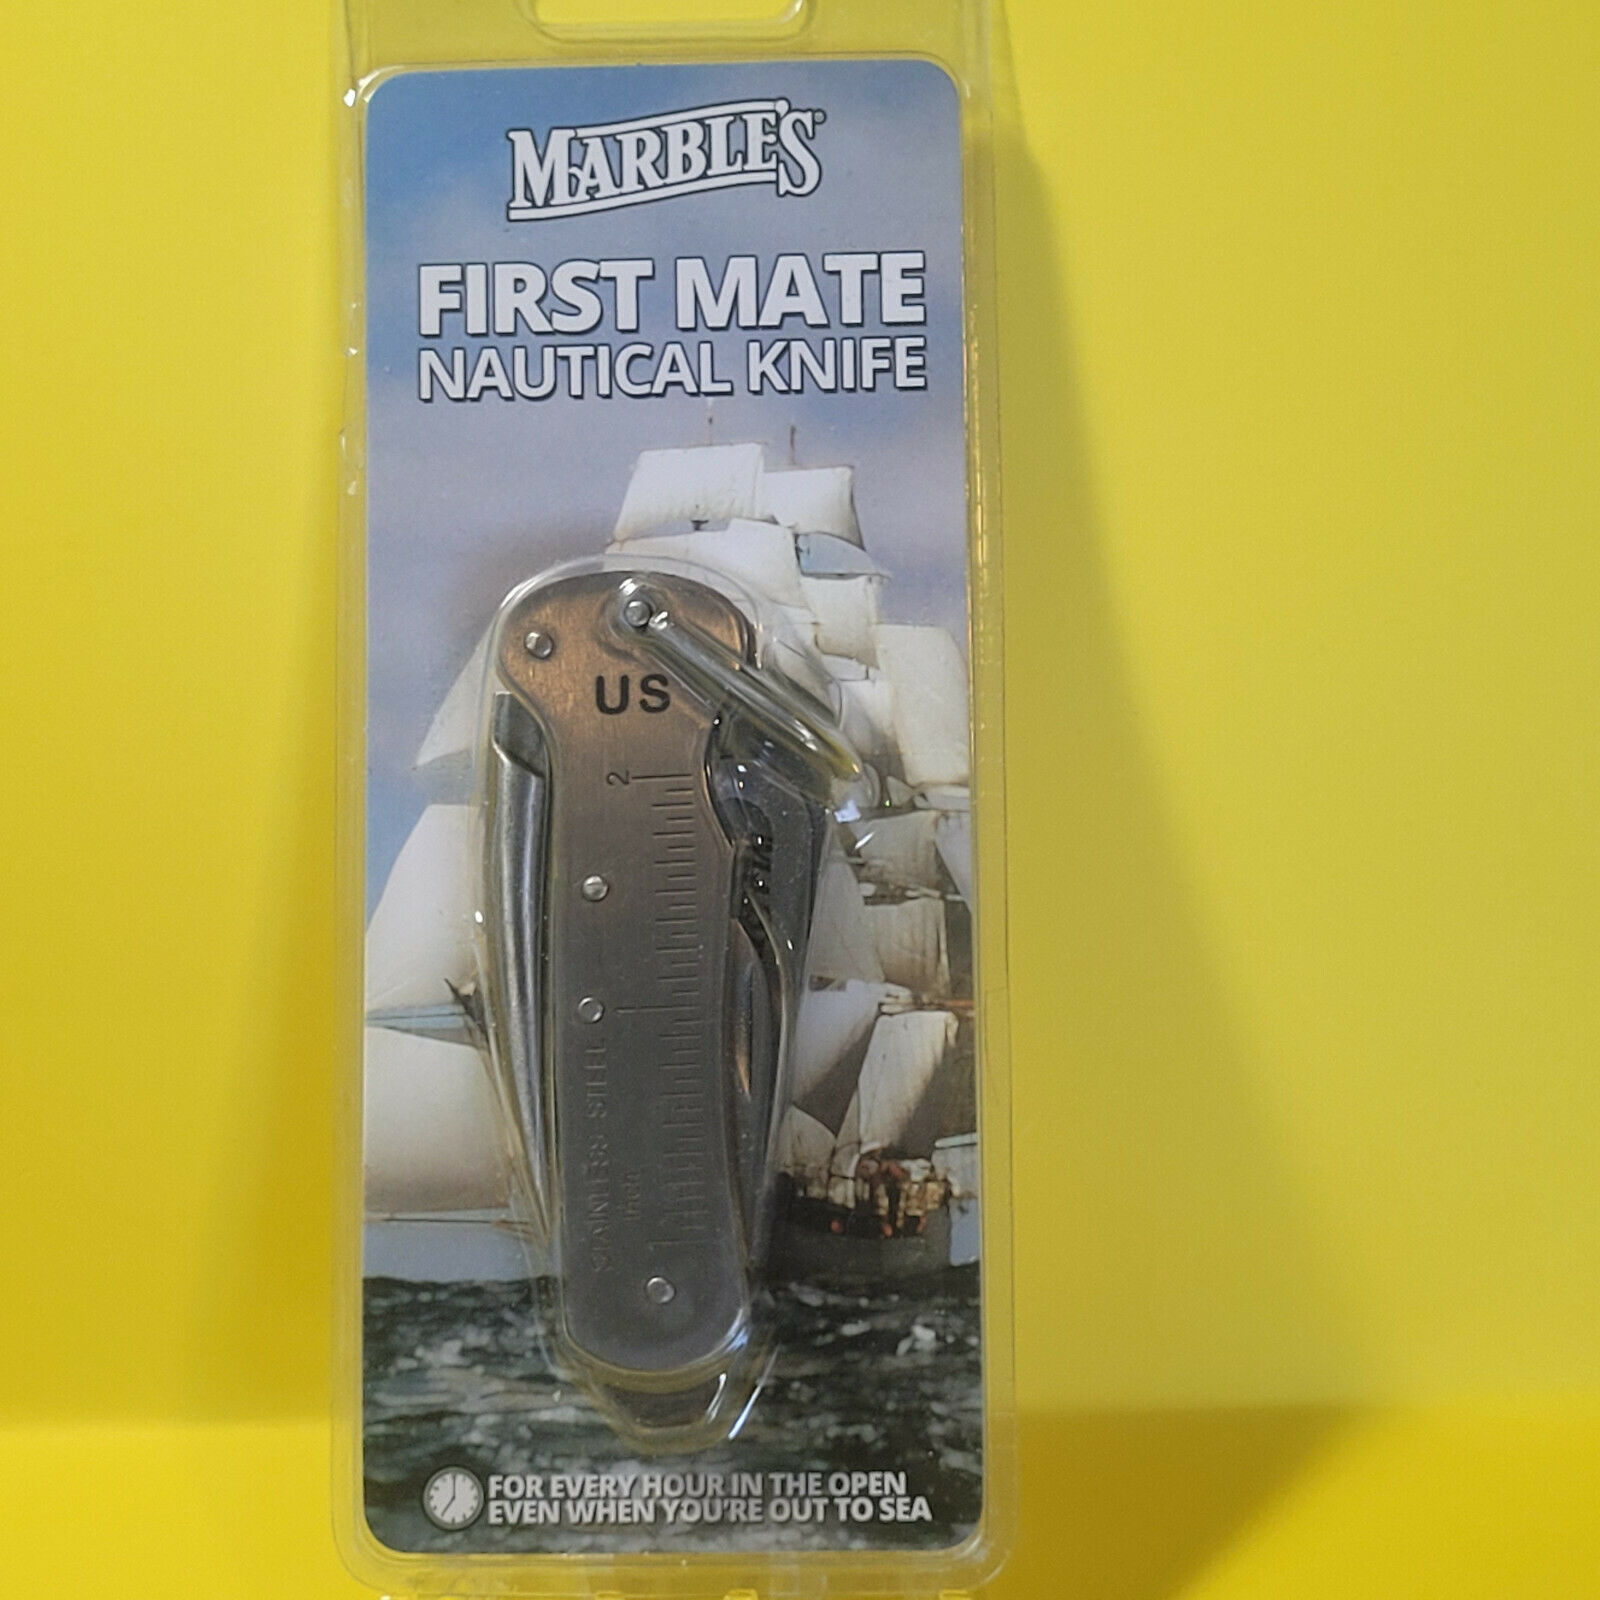 Marbles First Mate Nautical Knife